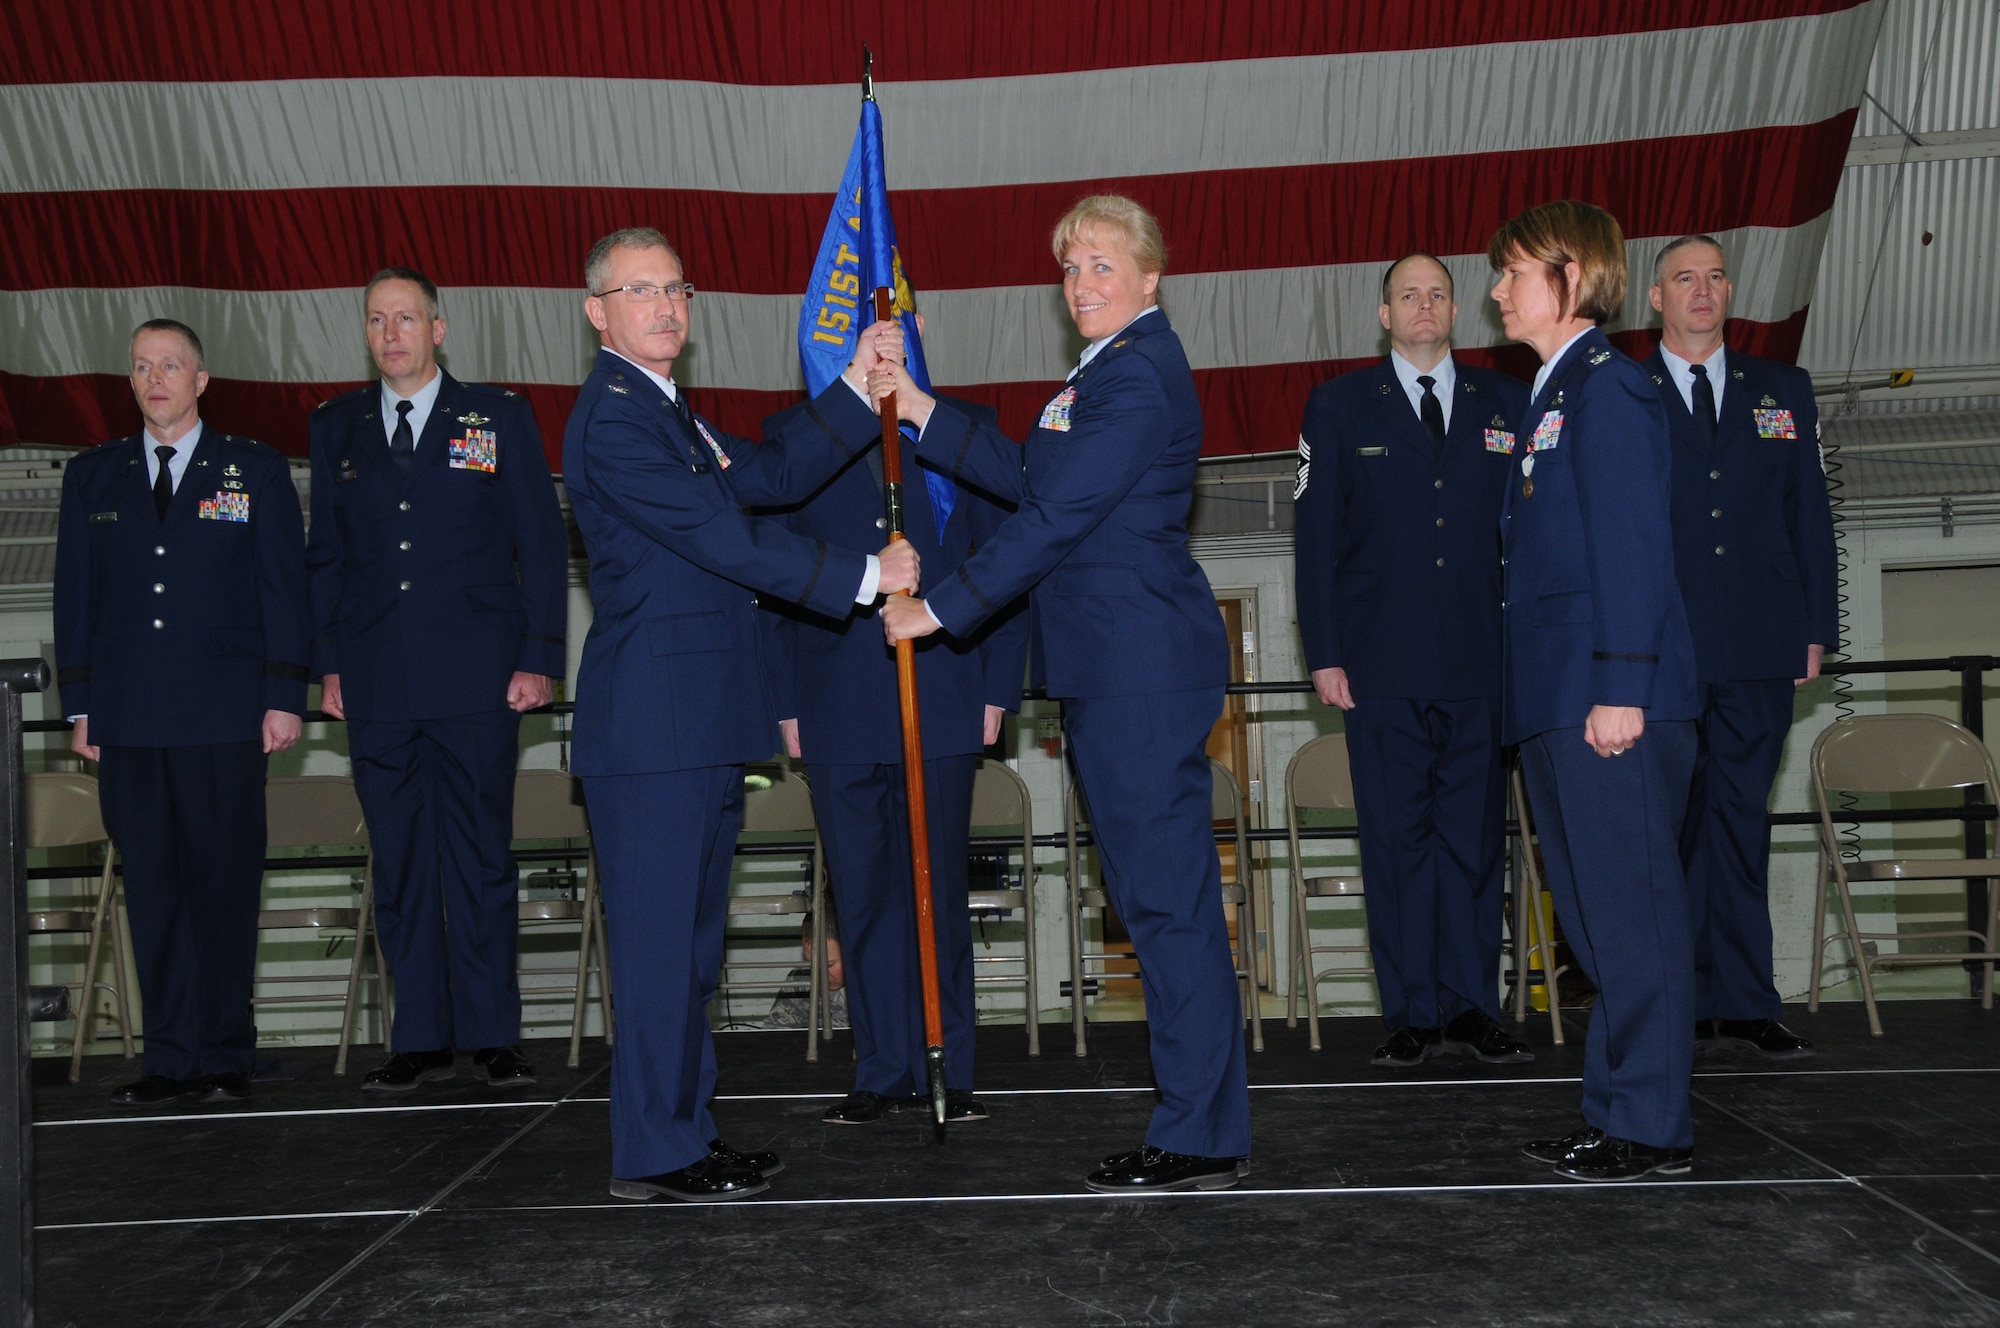 Col. Jack Wall hands the unit flag to Maj. Christina Lock, the incoming 151 LRS Commander as Col. Susan Melton looks on after relinquishing her command during a change of command ceremony held at the Utah National Guard Air Base in Salt Lake City, Utah, February 9, 2014. (Utah Air National Guard photo by TSgt Amber Monio) (Released)